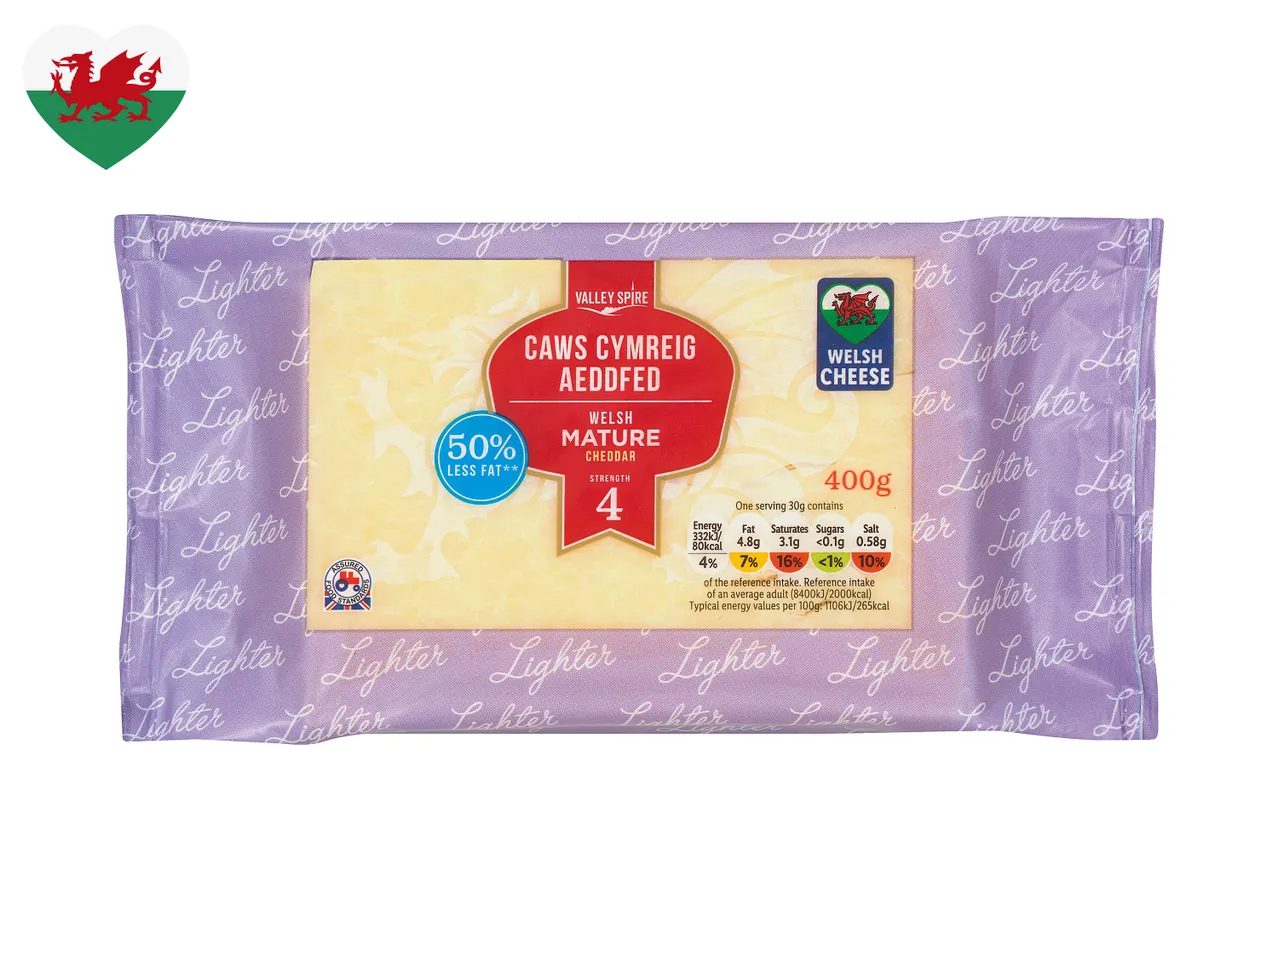 Go to full screen view: Valley Spire Welsh Lighter Mature Cheese - Image 1